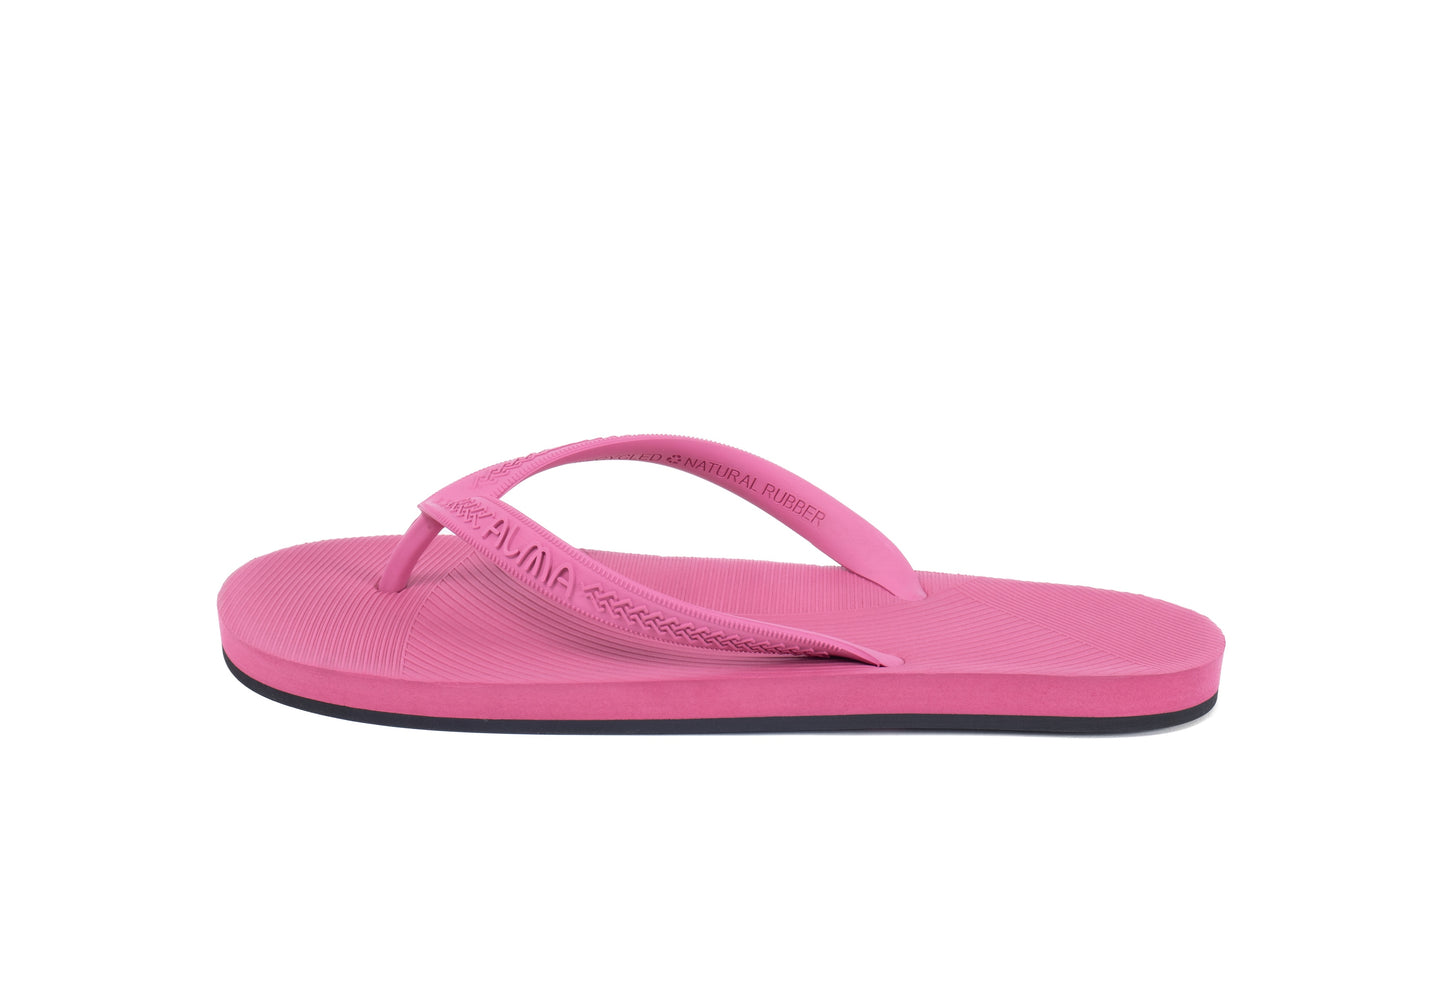 Women's Recycled Tire Sole Flip Flop - Rose